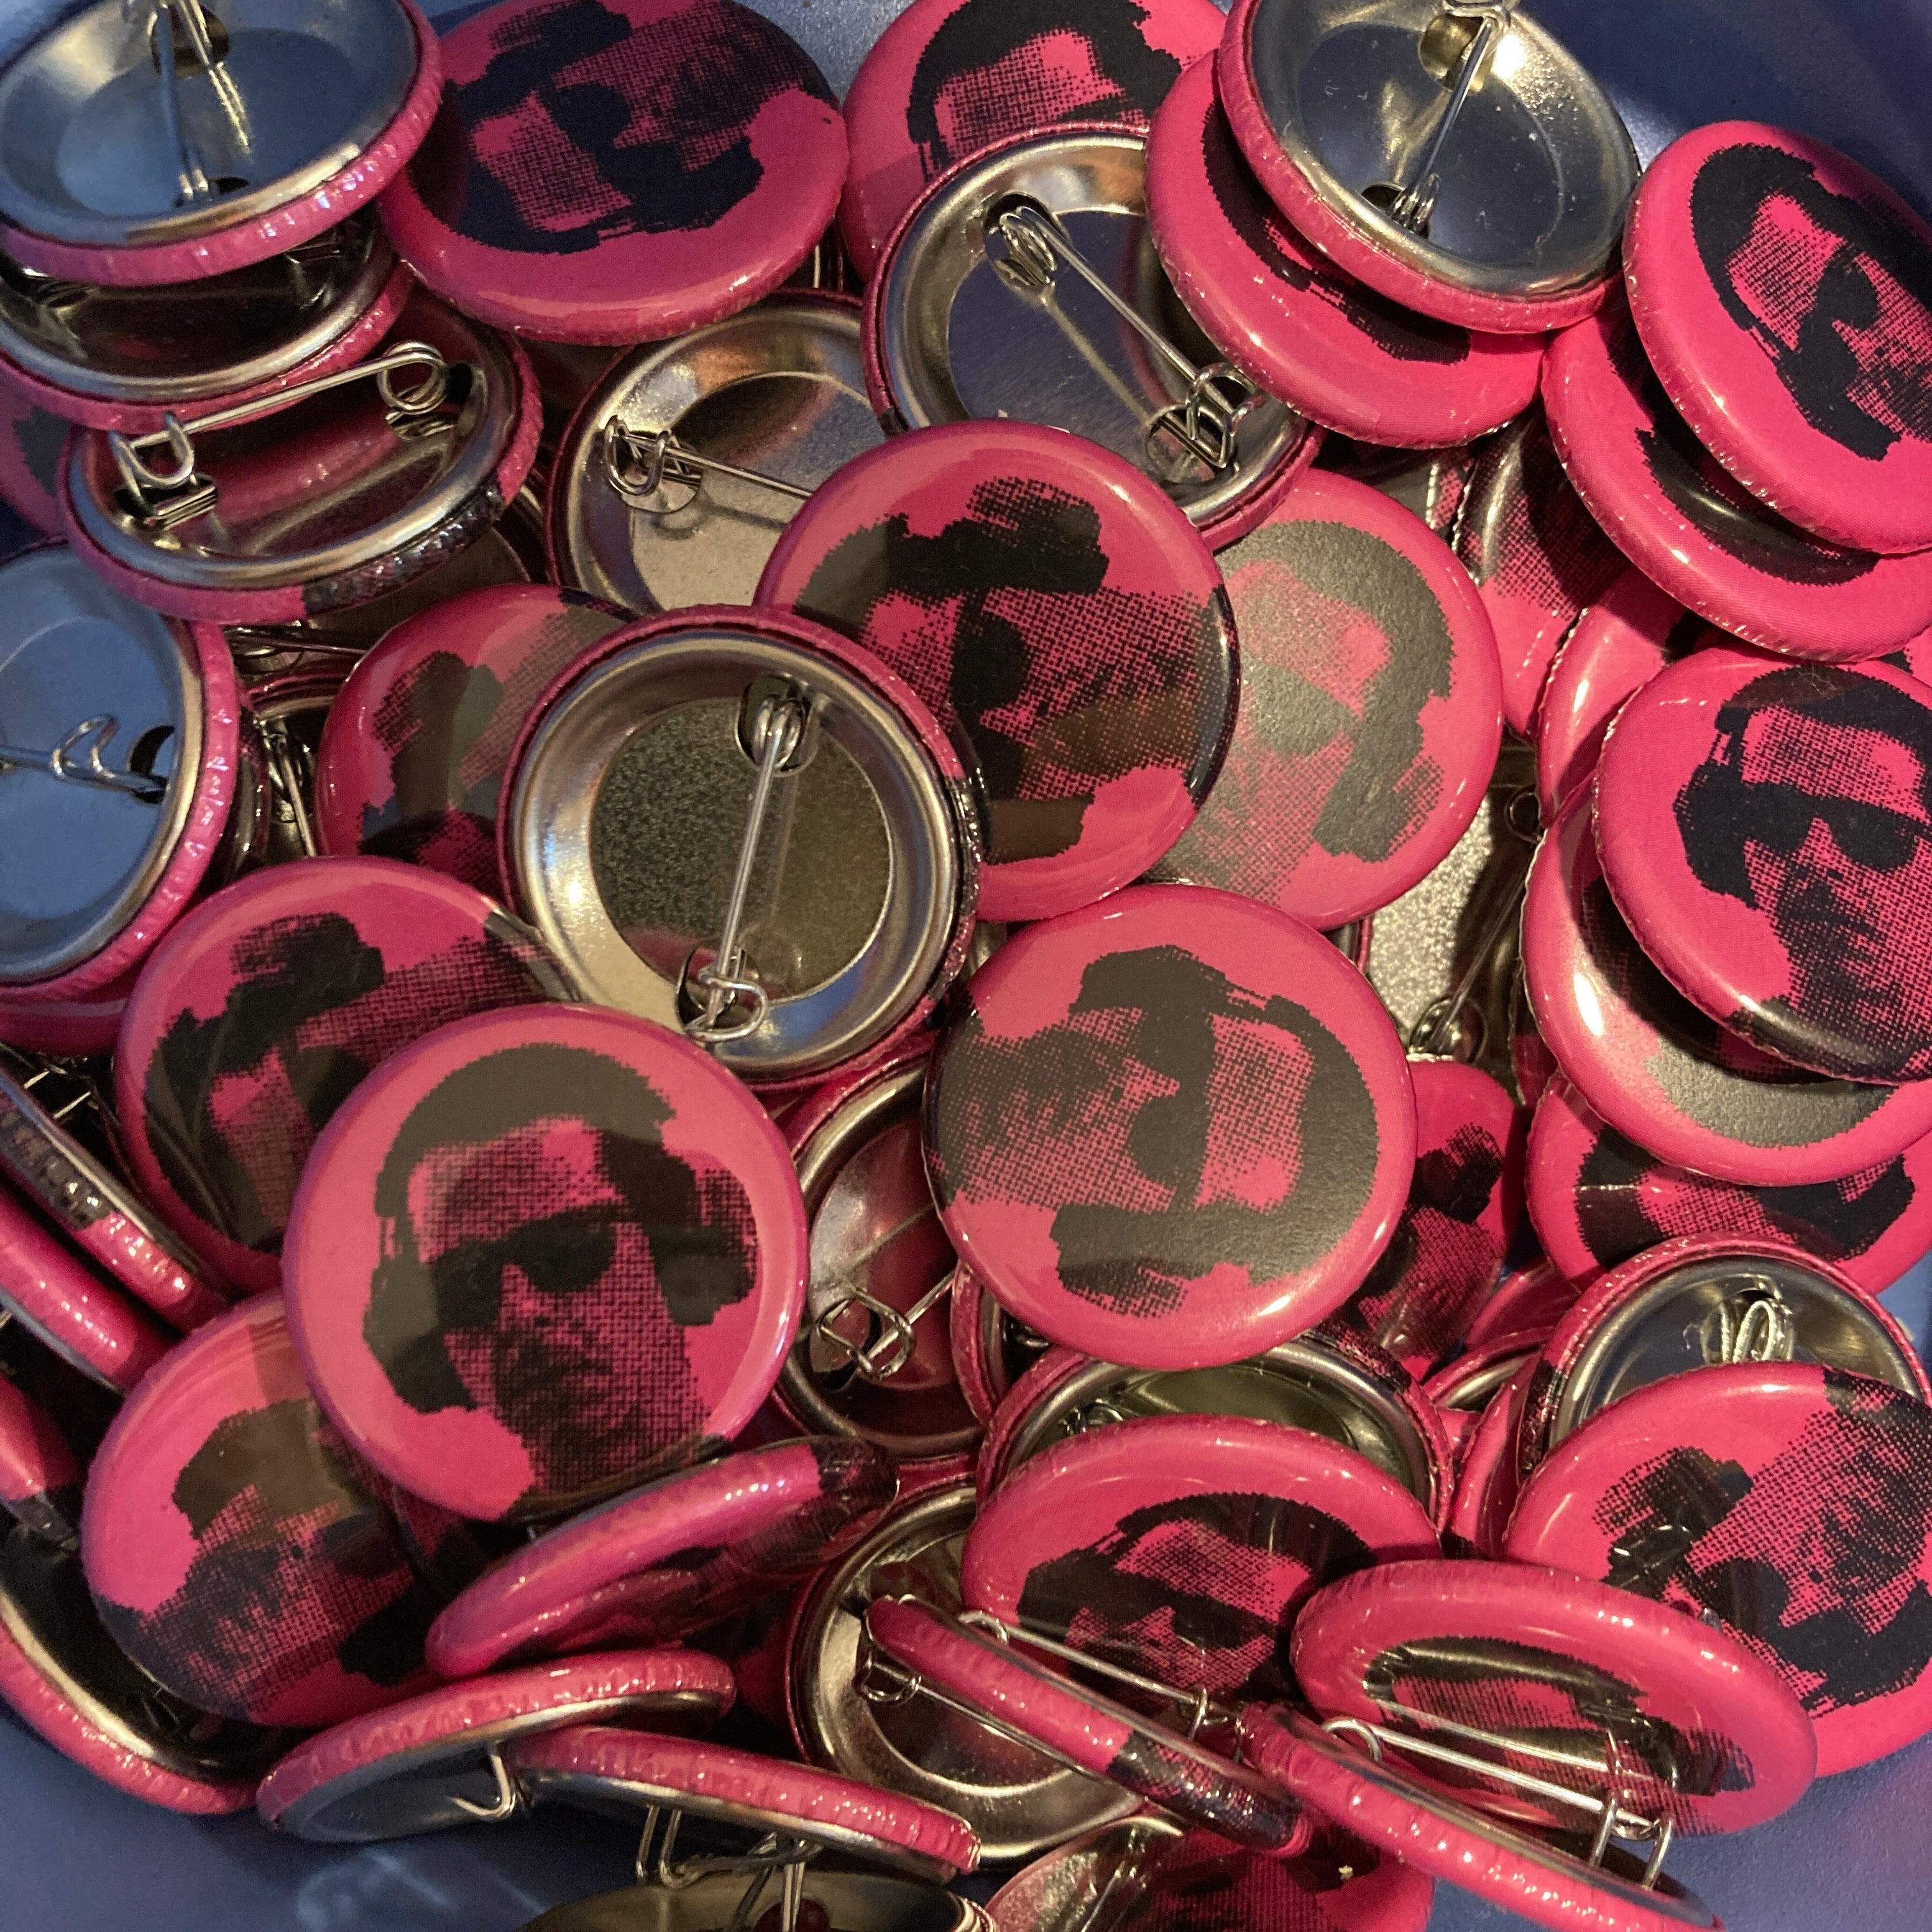 Kurt Pins and Buttons for Sale